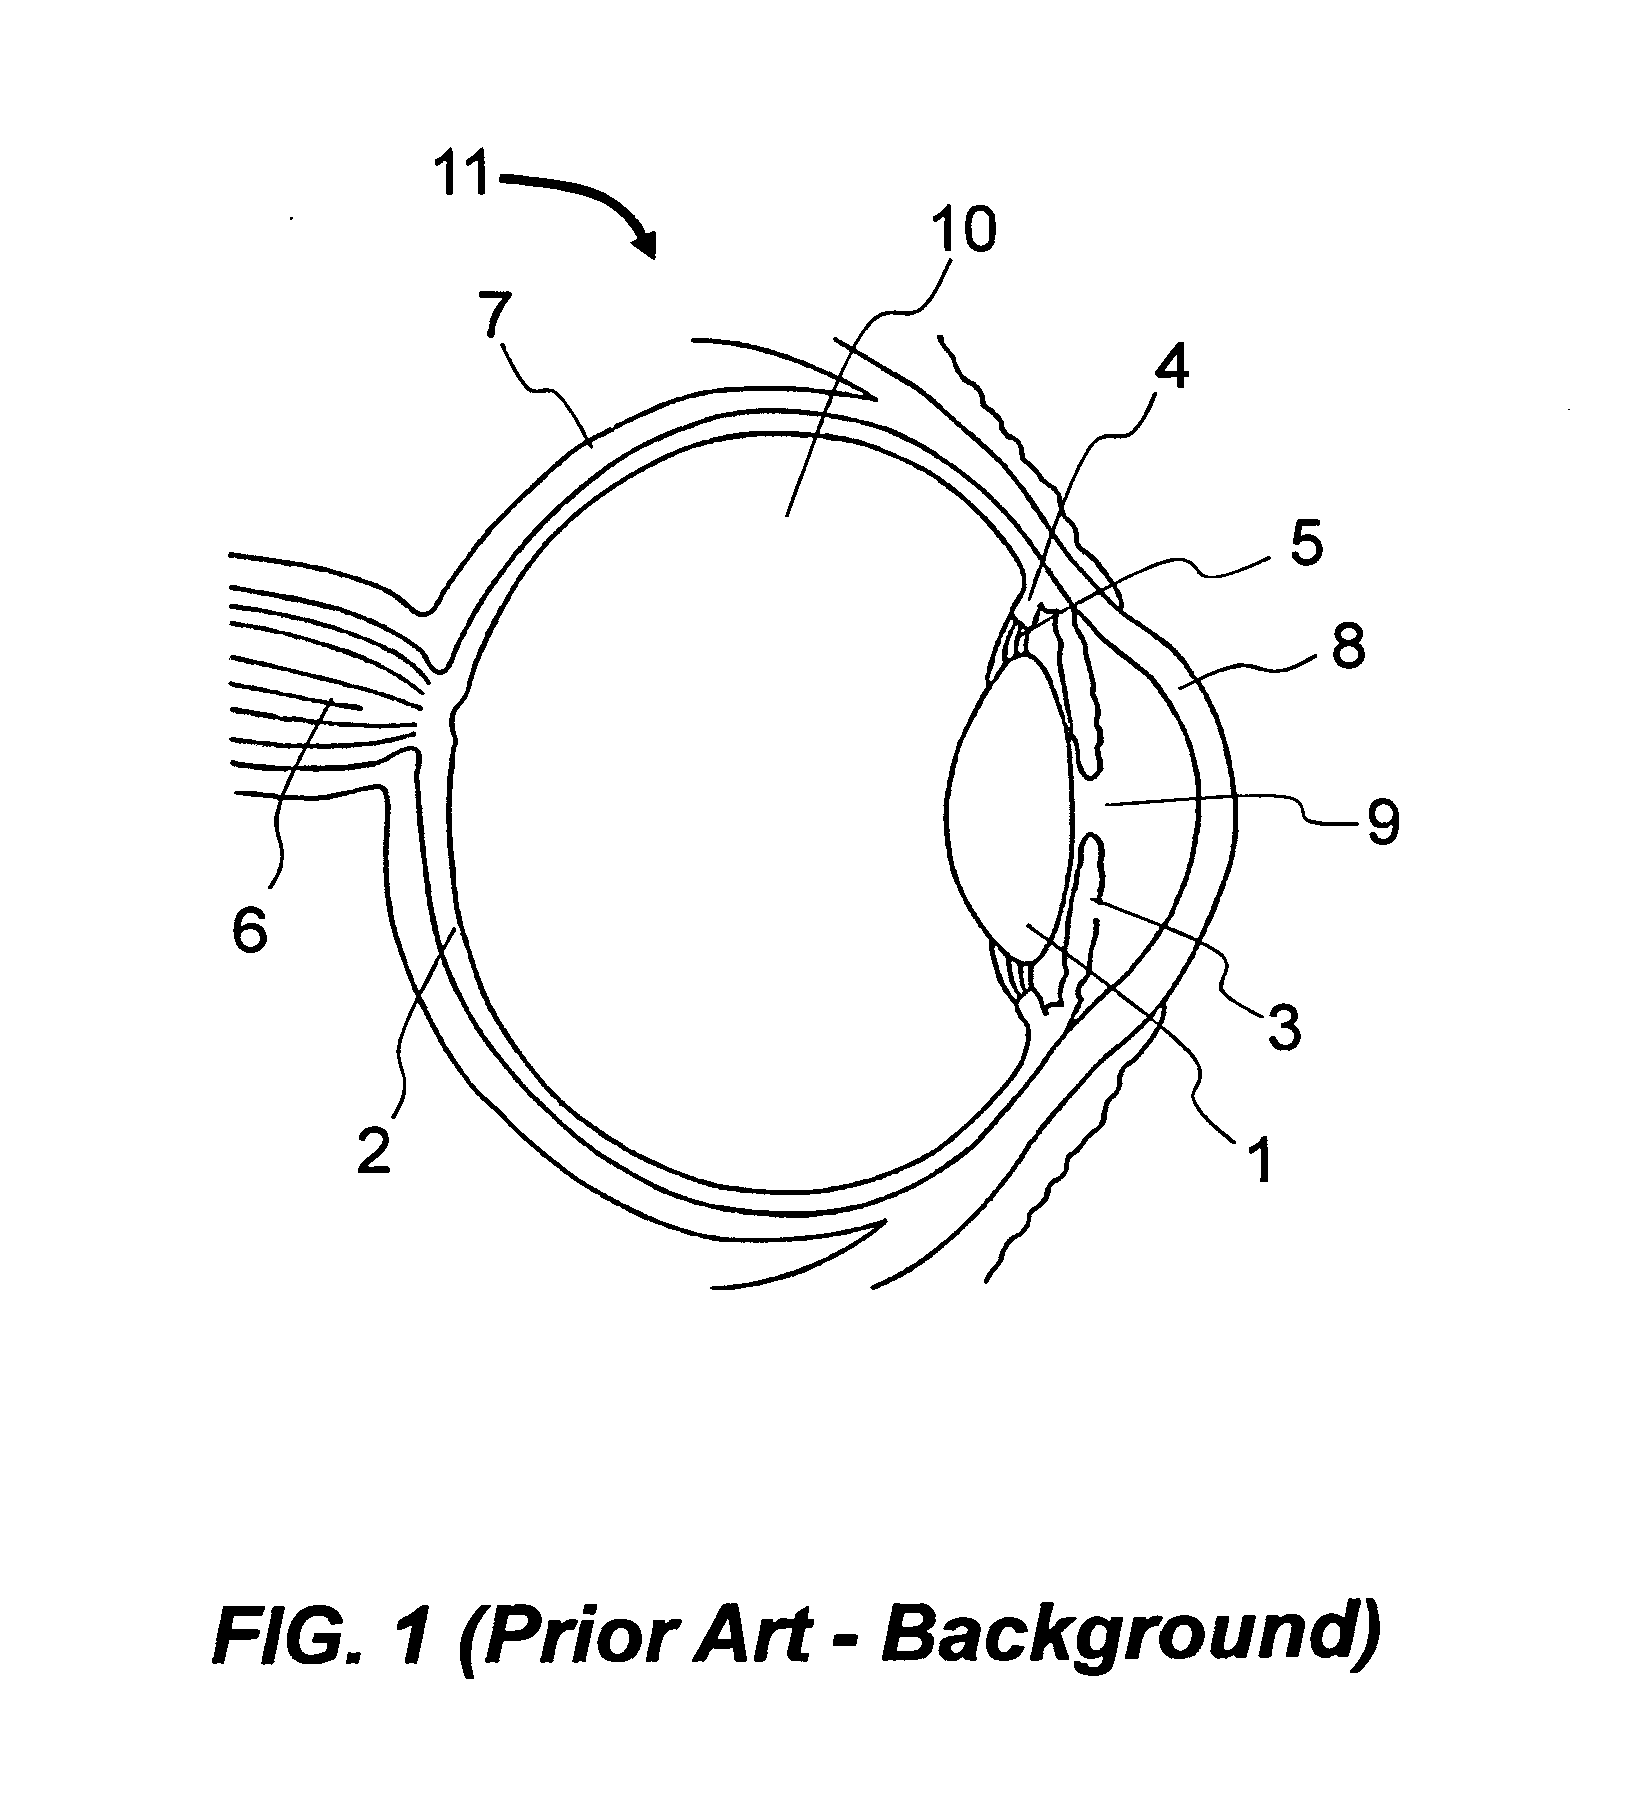 Method and apparatus to produce re-focusable vision by direct retinal projection with mirror array